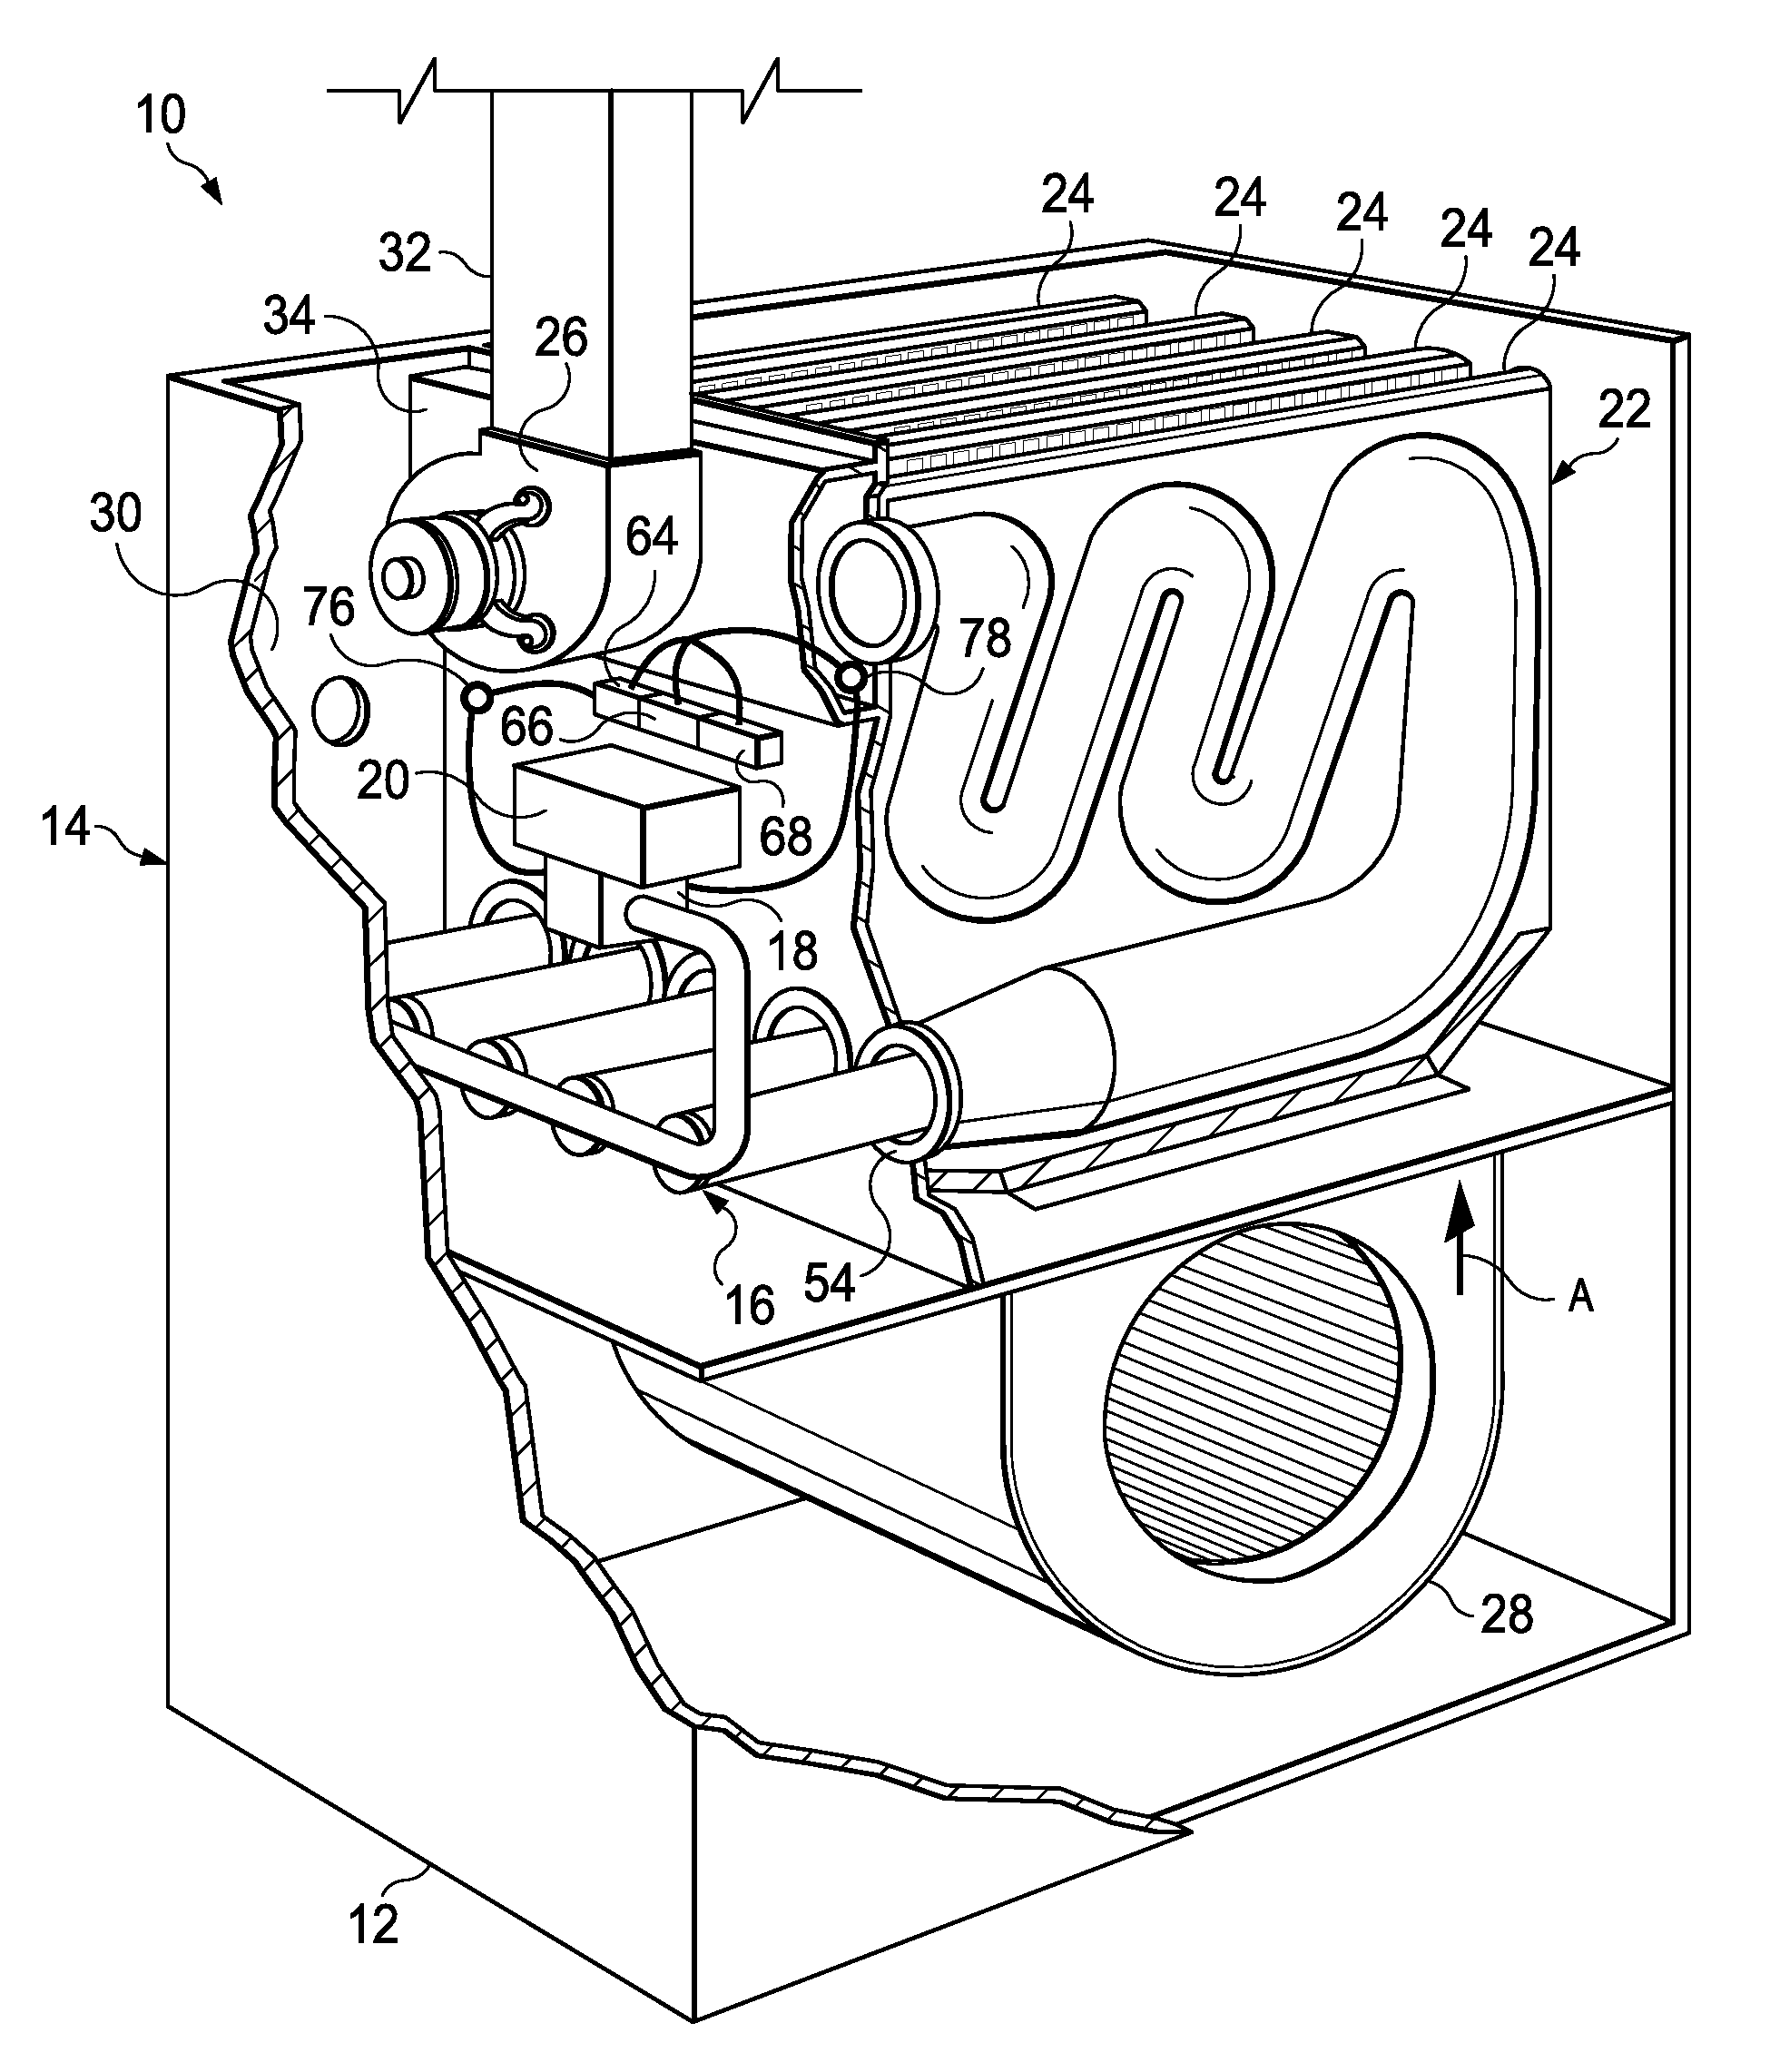 System and Method for Controlling A Furnace